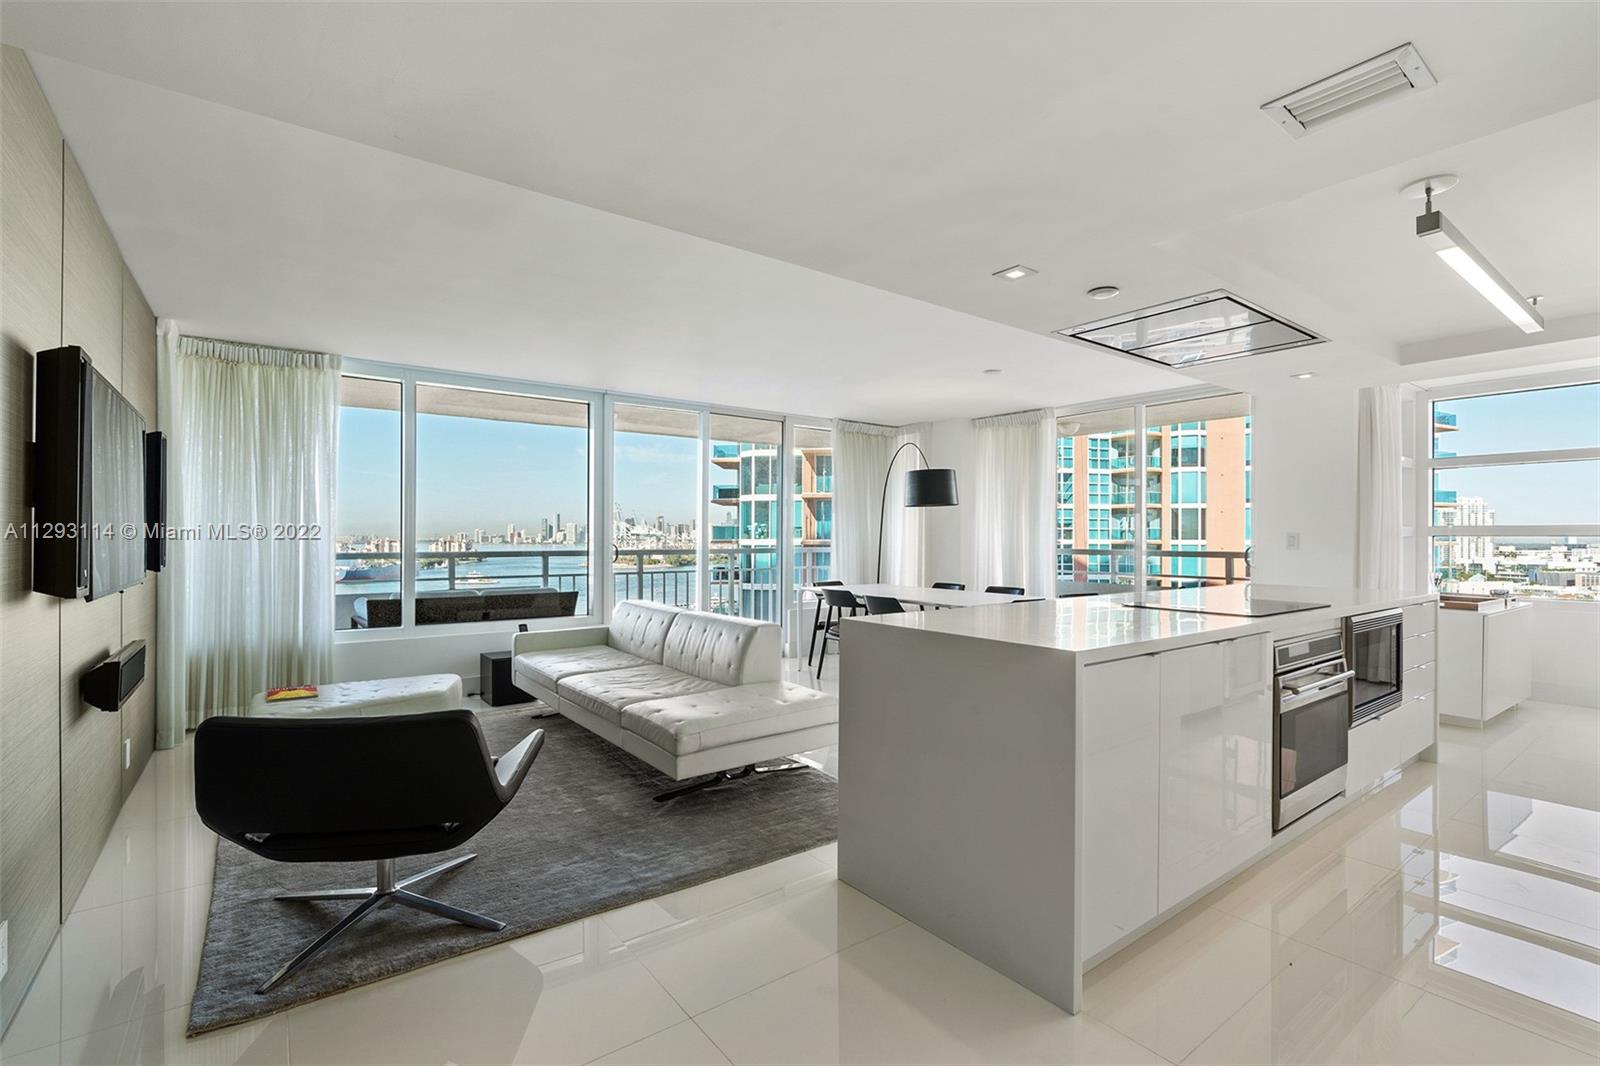 Photo 1 of South Pointe Towers South Pointe Apt 1609 in Miami Beach - MLS A11293114